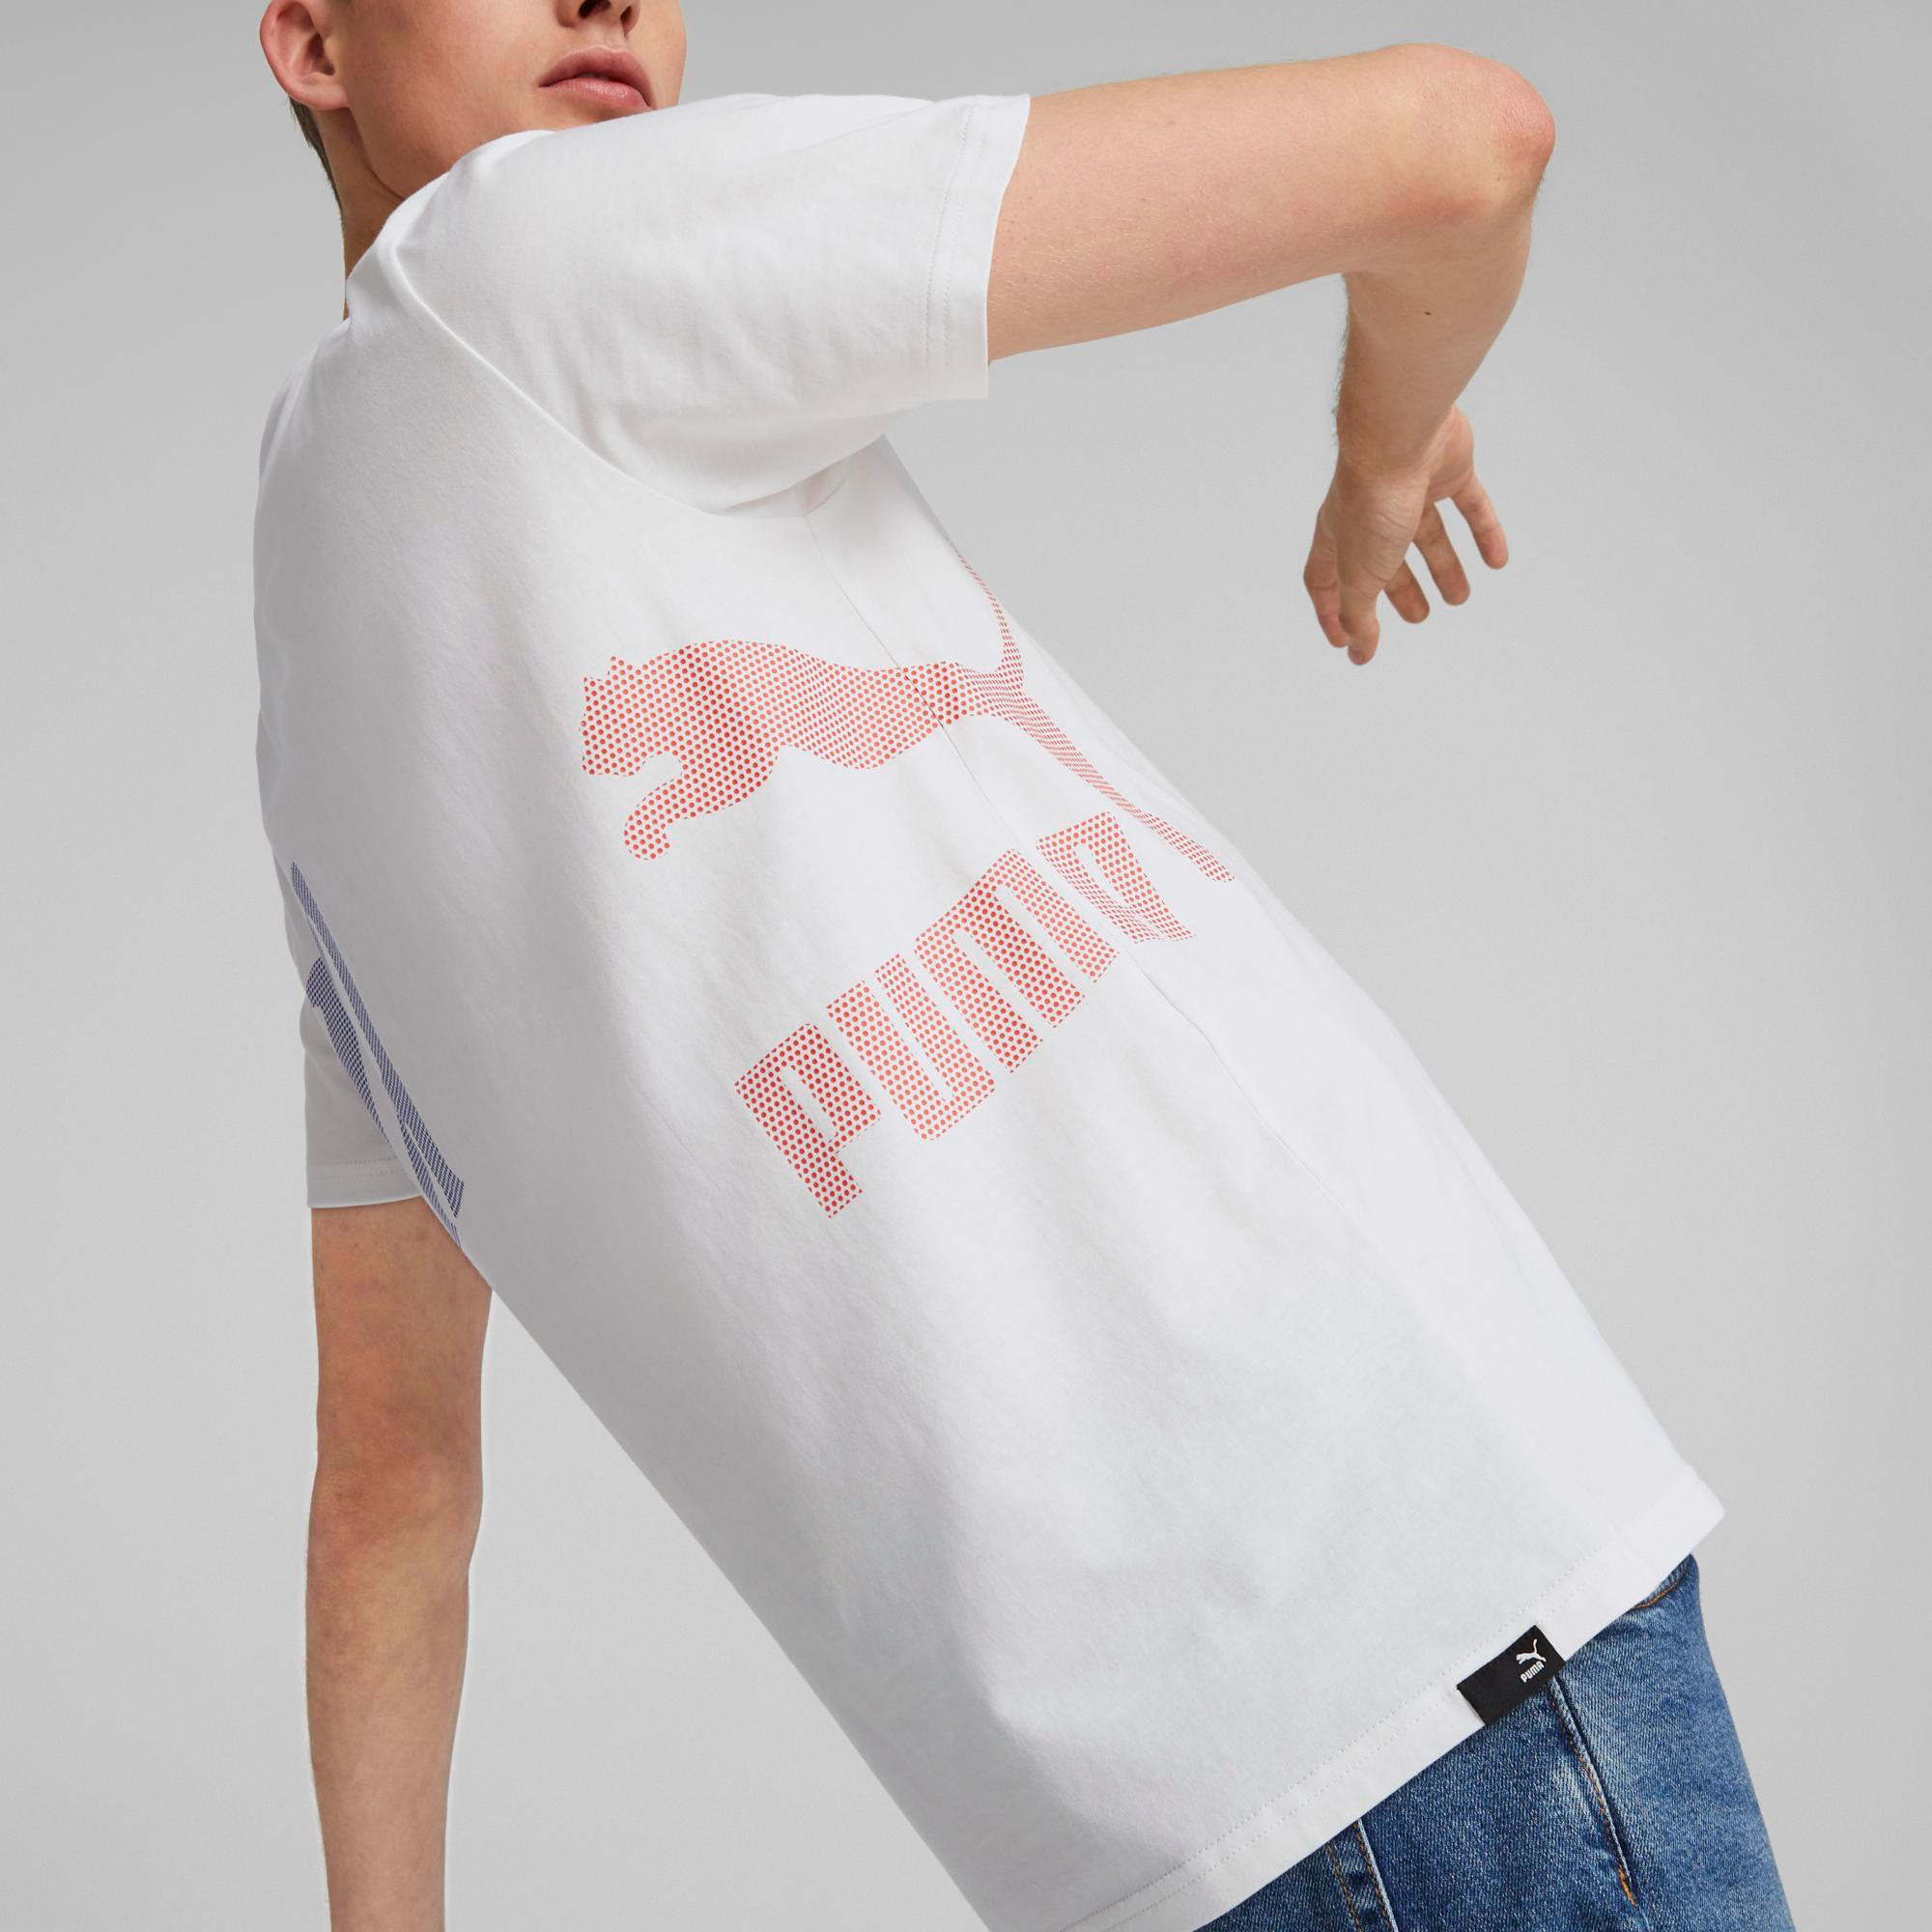 Puma - T-shirt in cotone con logo, Bianco, large image number 4